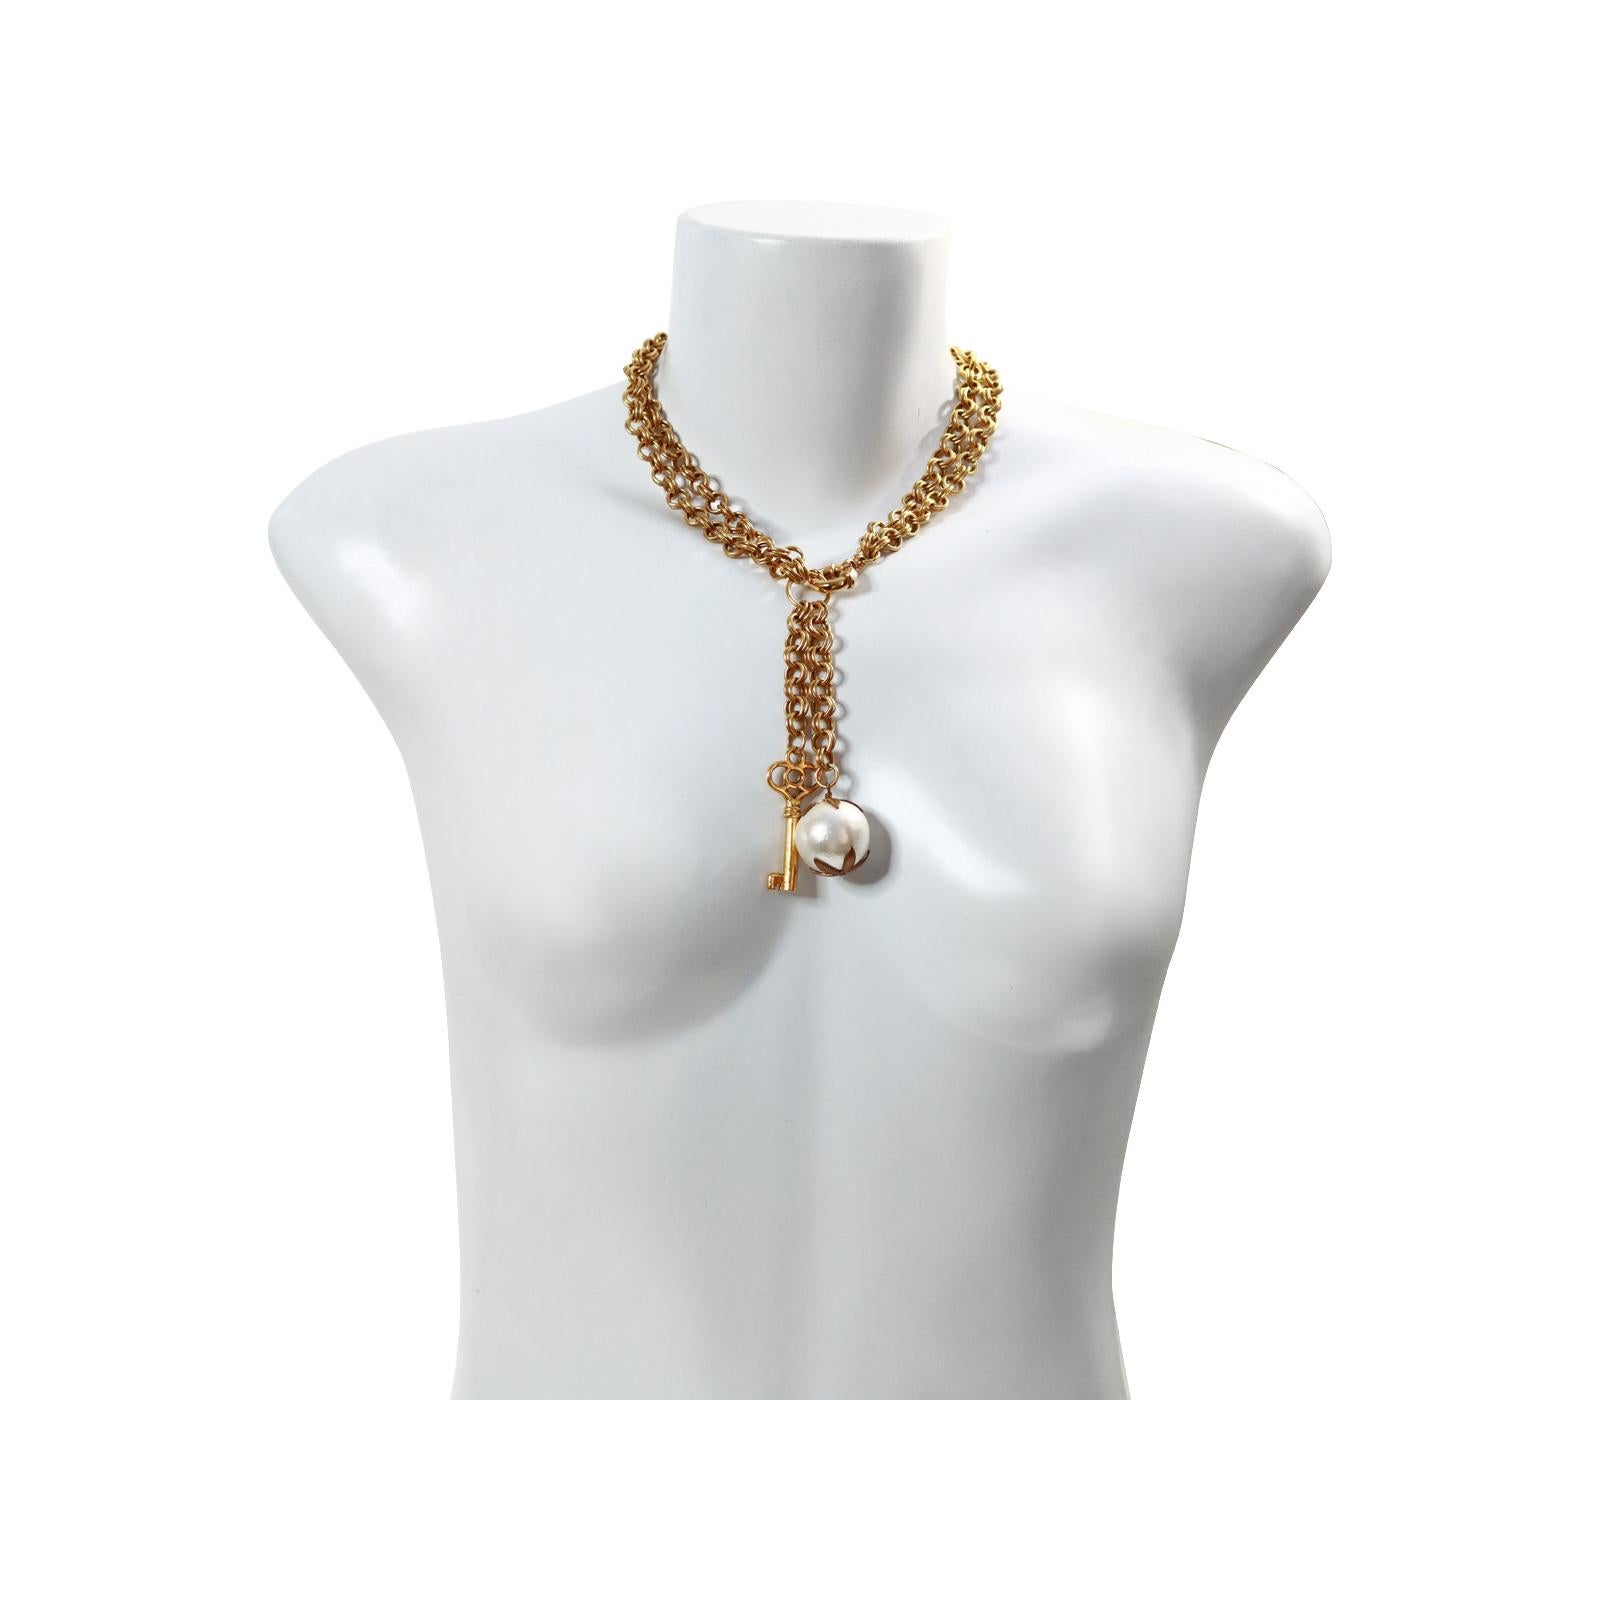 Vintage Gold Tone Lariat Drop Key and Faux Pearl Necklace Circa 1980's For Sale 2